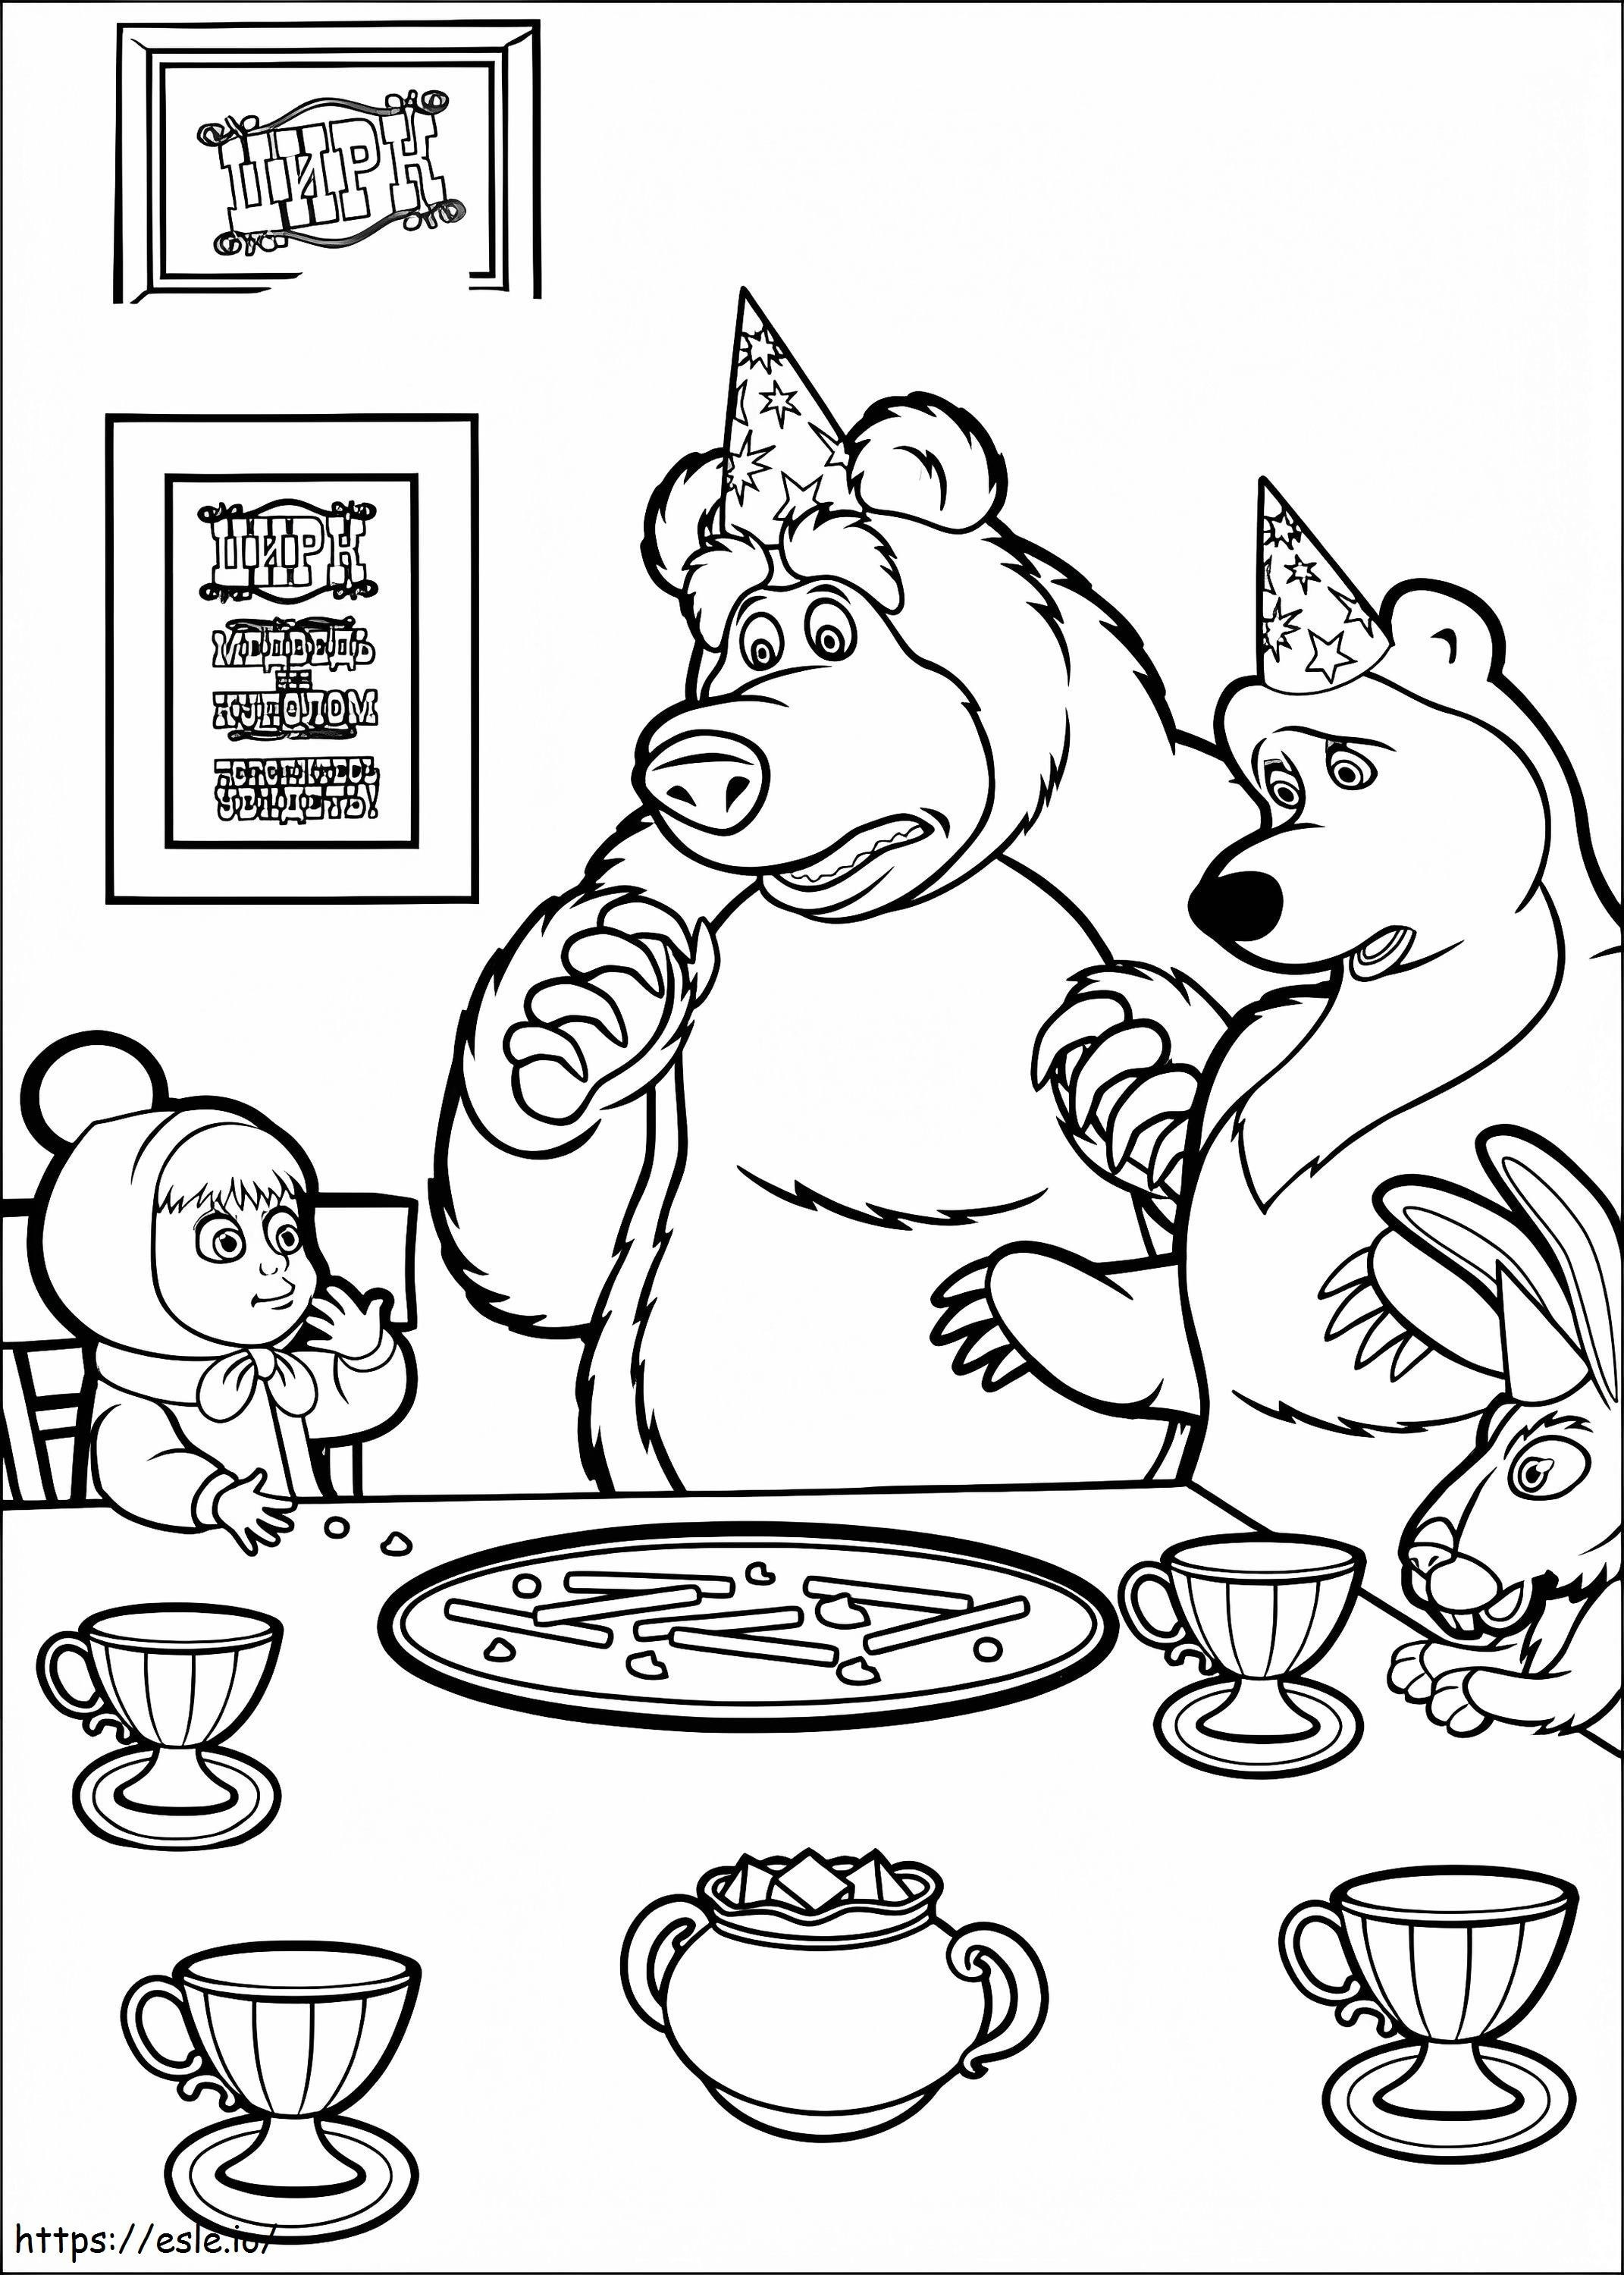 Masha In Party coloring page